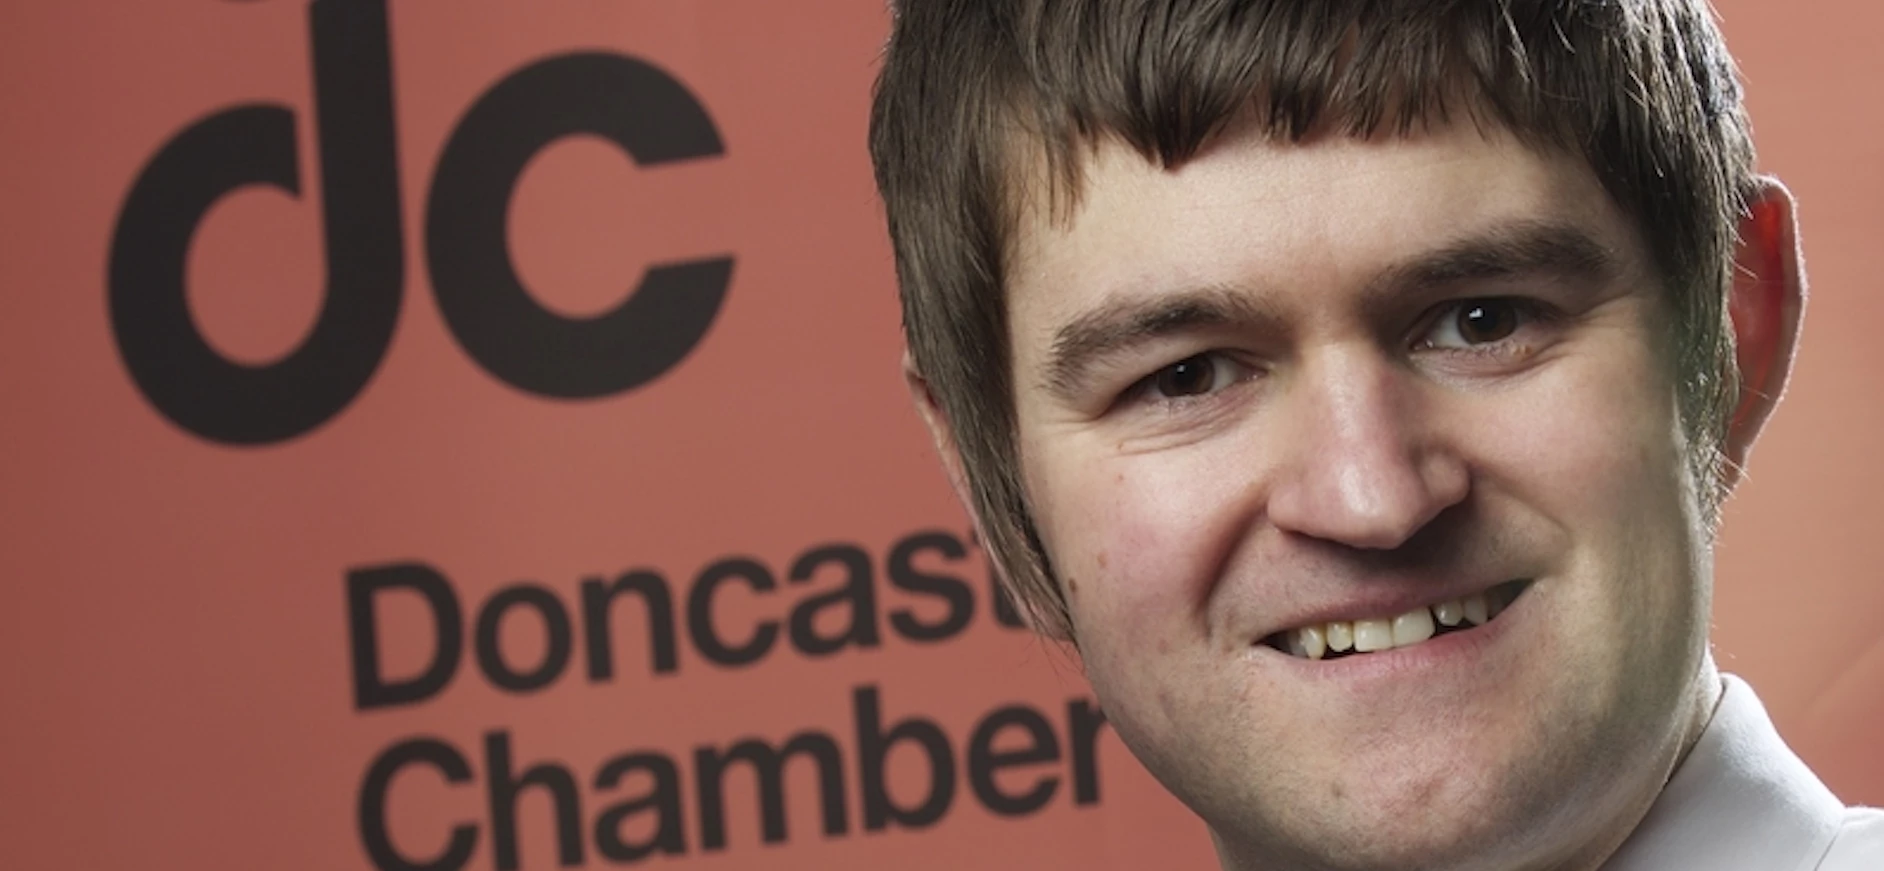 Dan Fell, chief executive of Doncaster Chamber. 